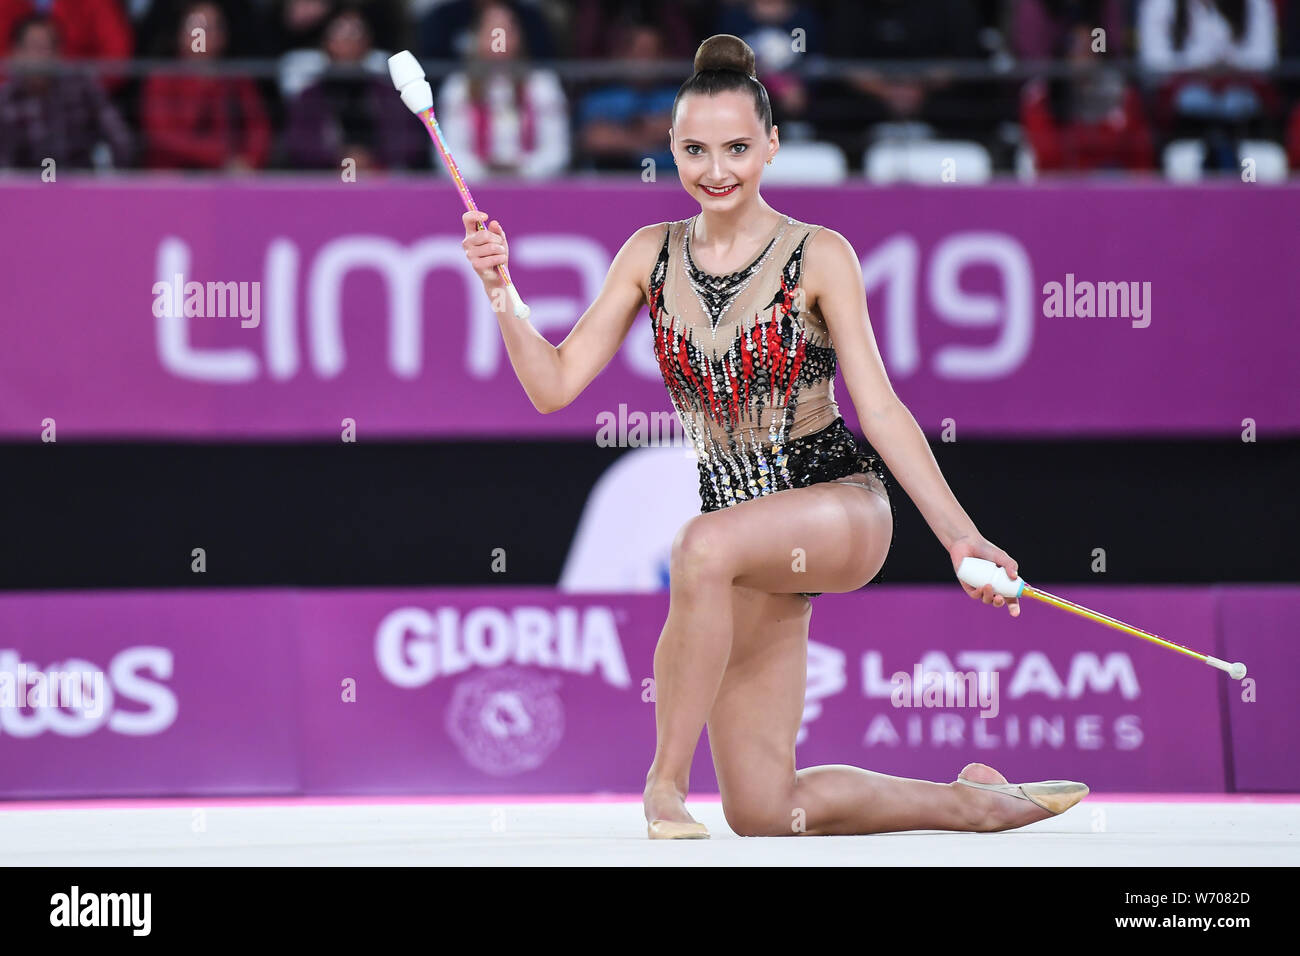 Lima, Peru. 3rd Aug, 2019. CAMILLA FEELEY from the US competes in the individual All-Around with the clubs during the competition held in the Polideportivo Villa El Salvador in Lima, Peru. Credit: Amy Sanderson/ZUMA Wire/Alamy Live News Stock Photo